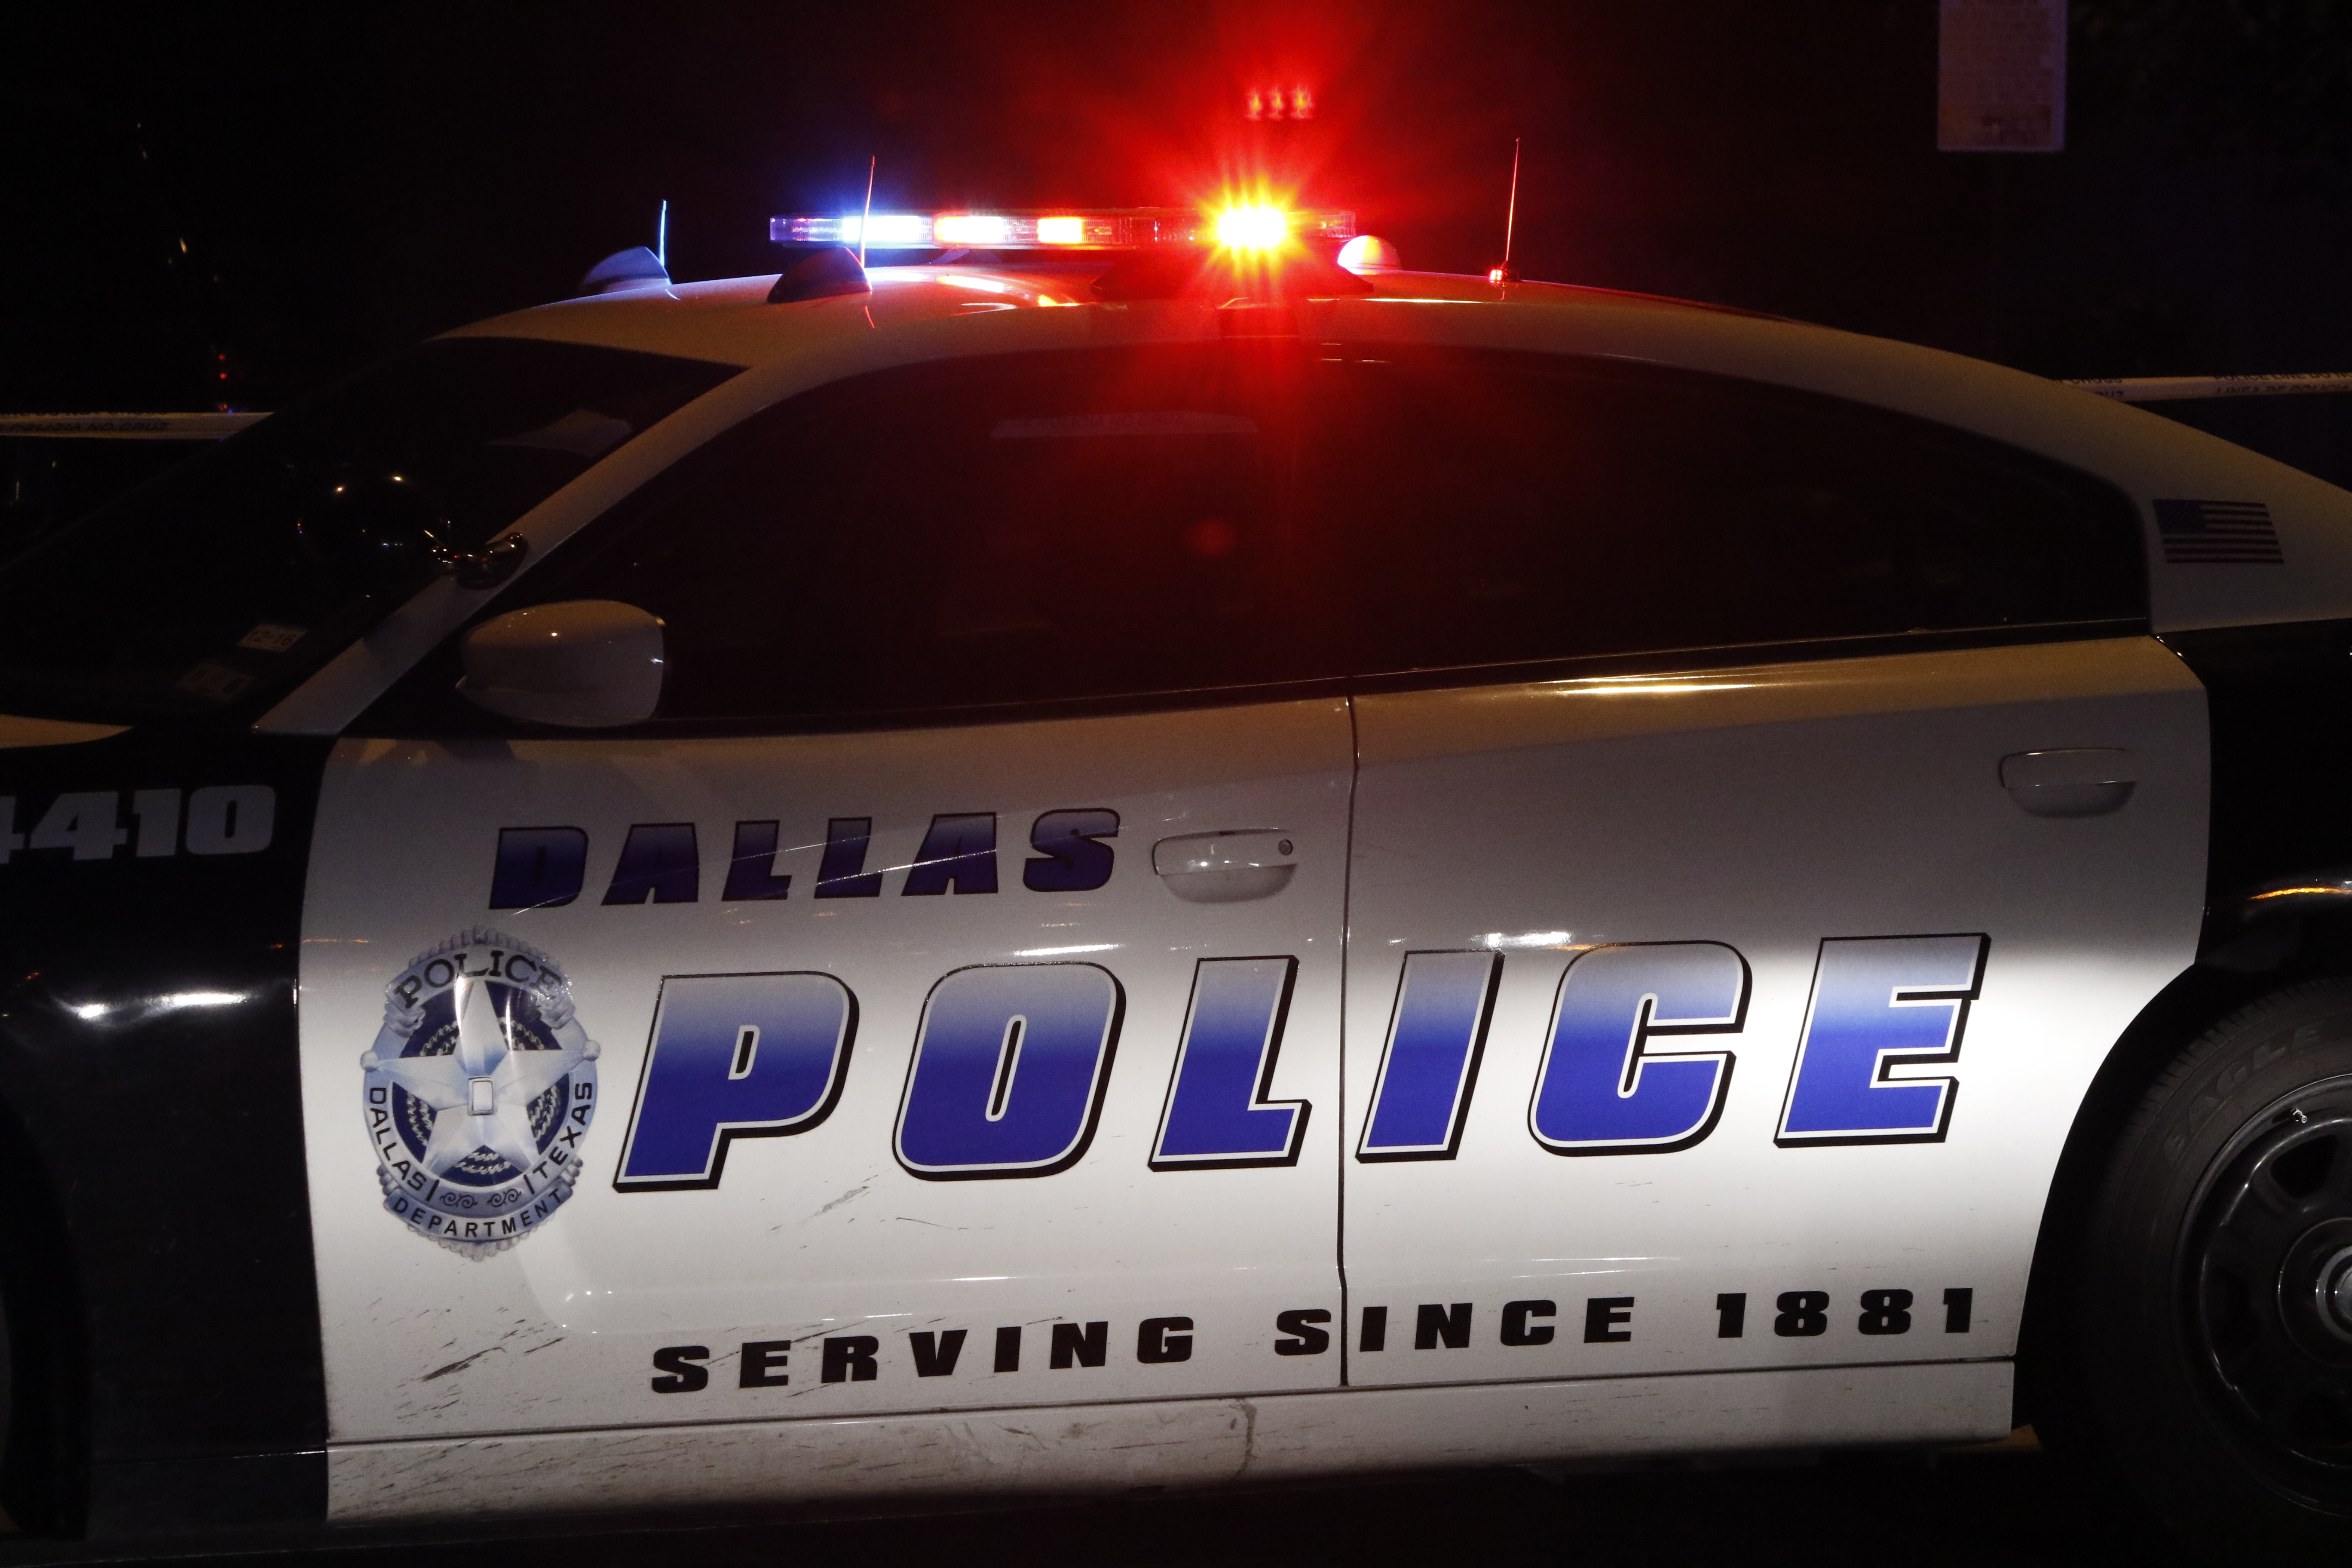 STOCK - Dallas Police car

Police car

Flashing lights

Police tape

Stock

Fire truck

DFD
...